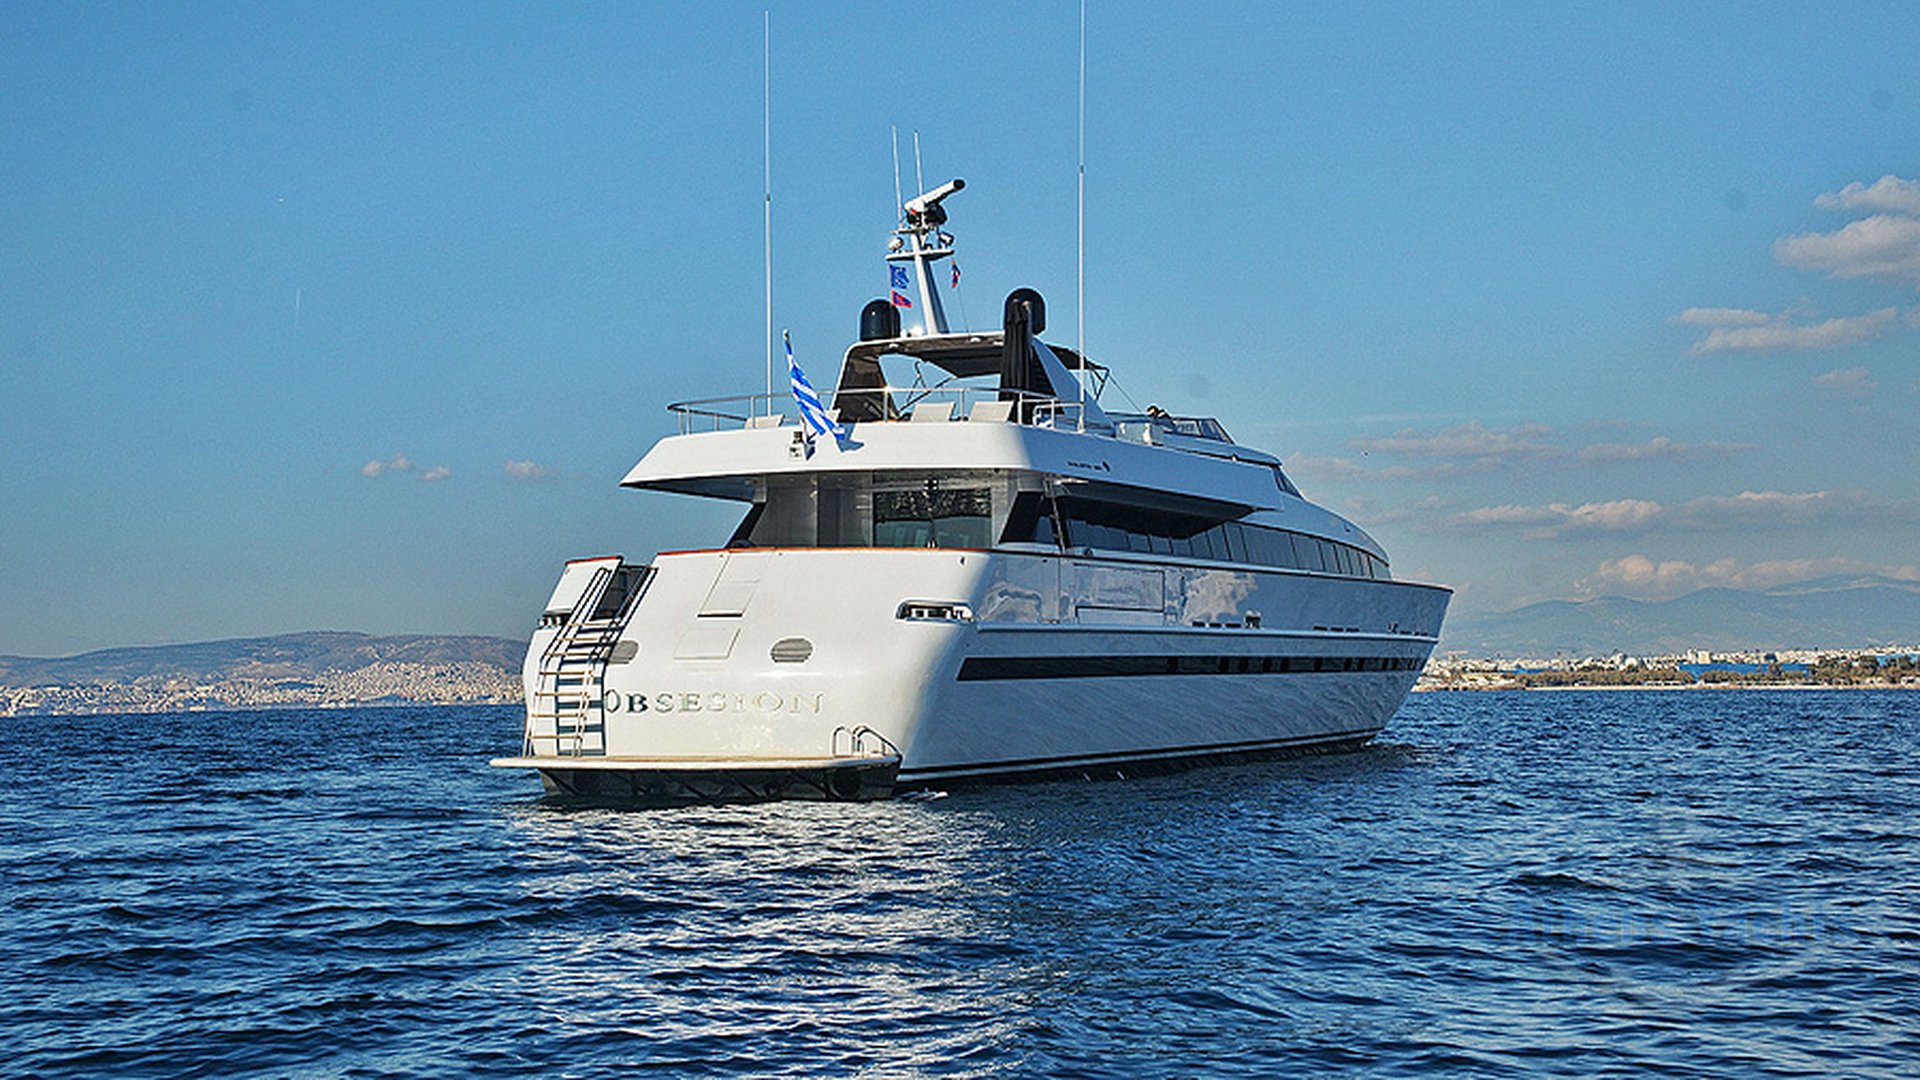 MBL Luxury Yachting Services